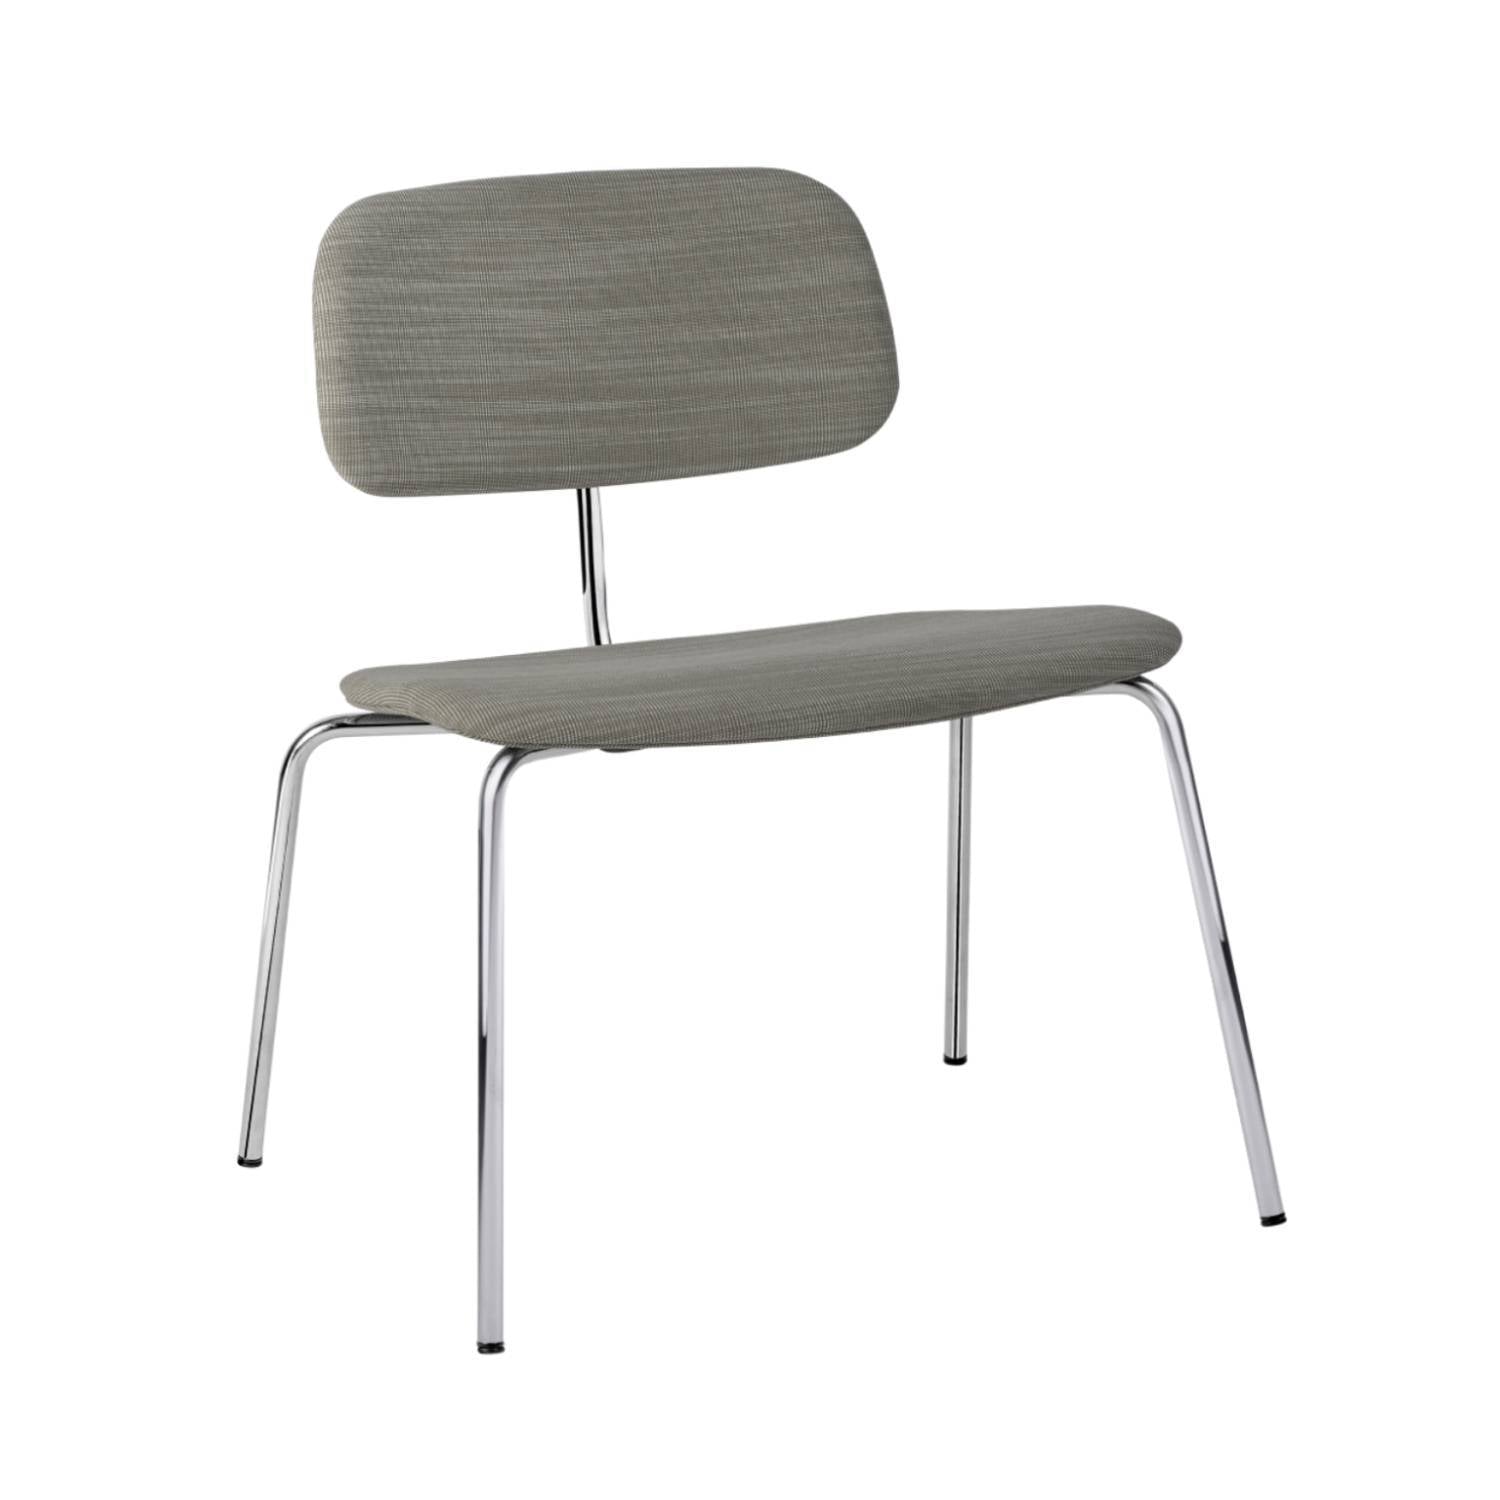 Kevi 2063 Lounge Chair: Fully Upholstered + Polished Chrome